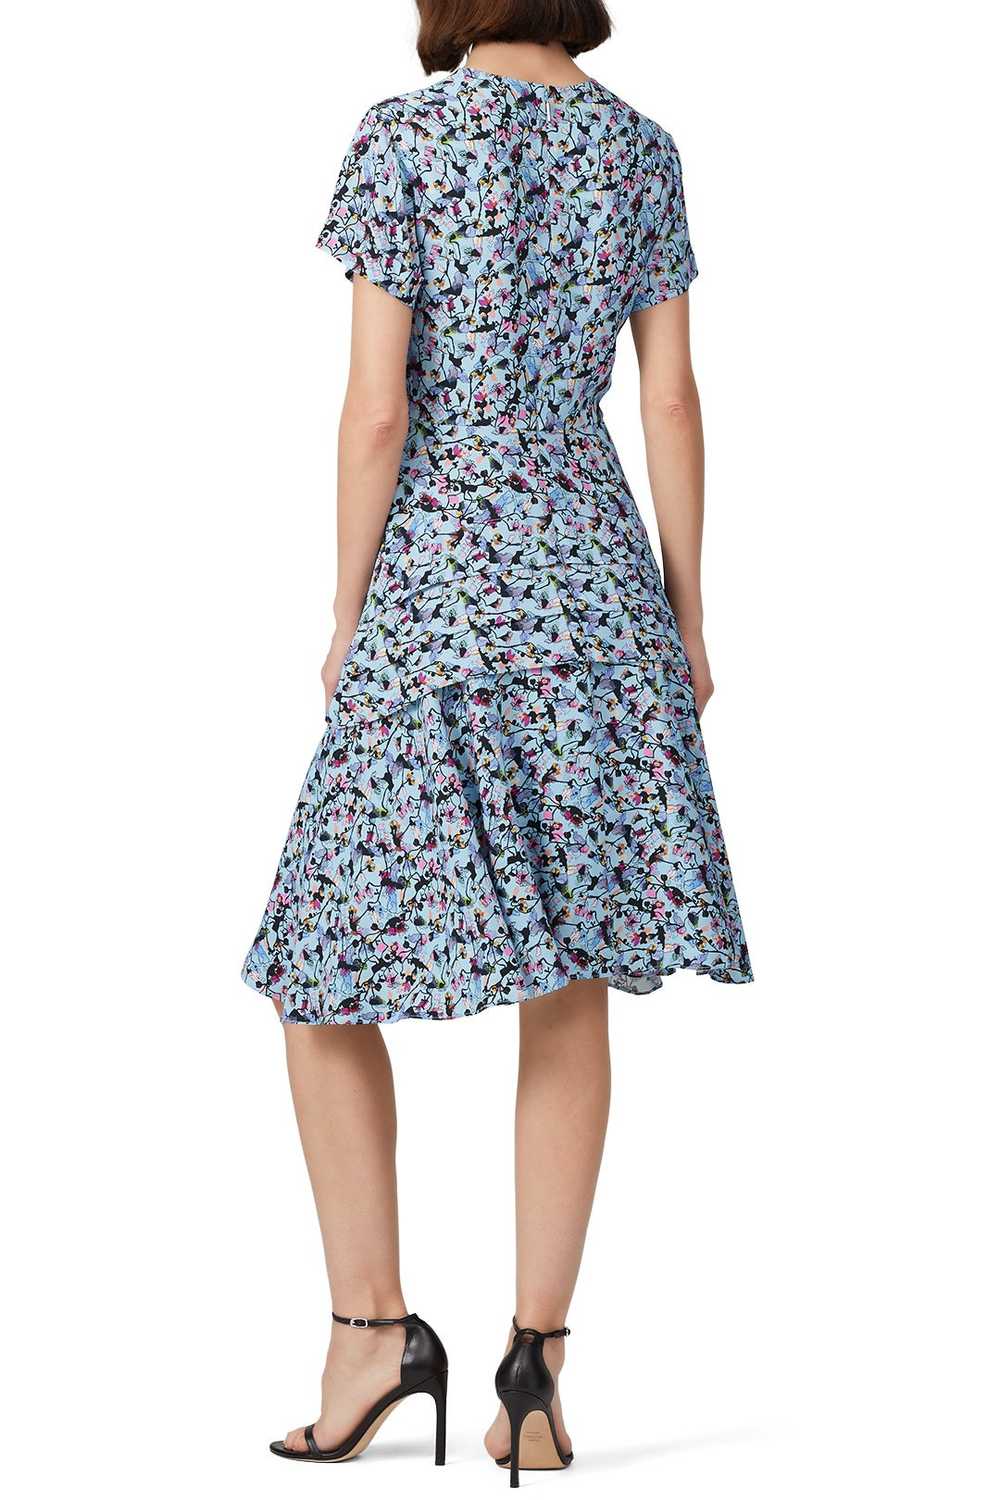 Jason Wu Collection Blue Floral Day Dress - image 2